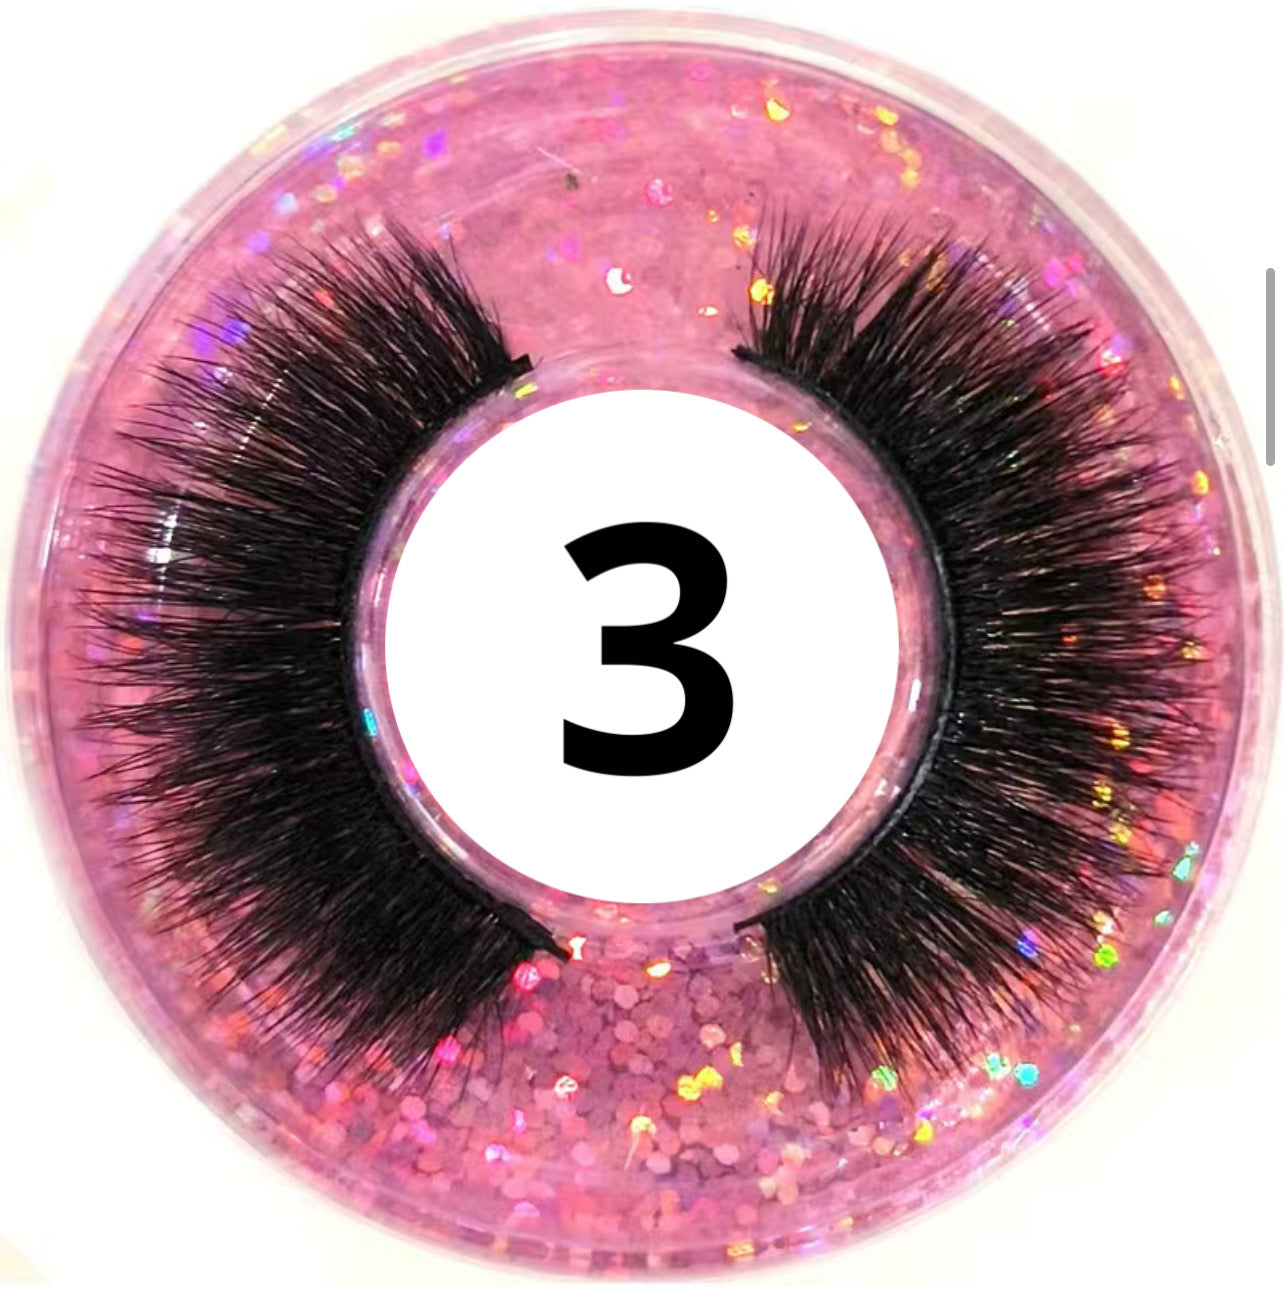 Wholesale Lashes 50/100 Pairs Mix Styles